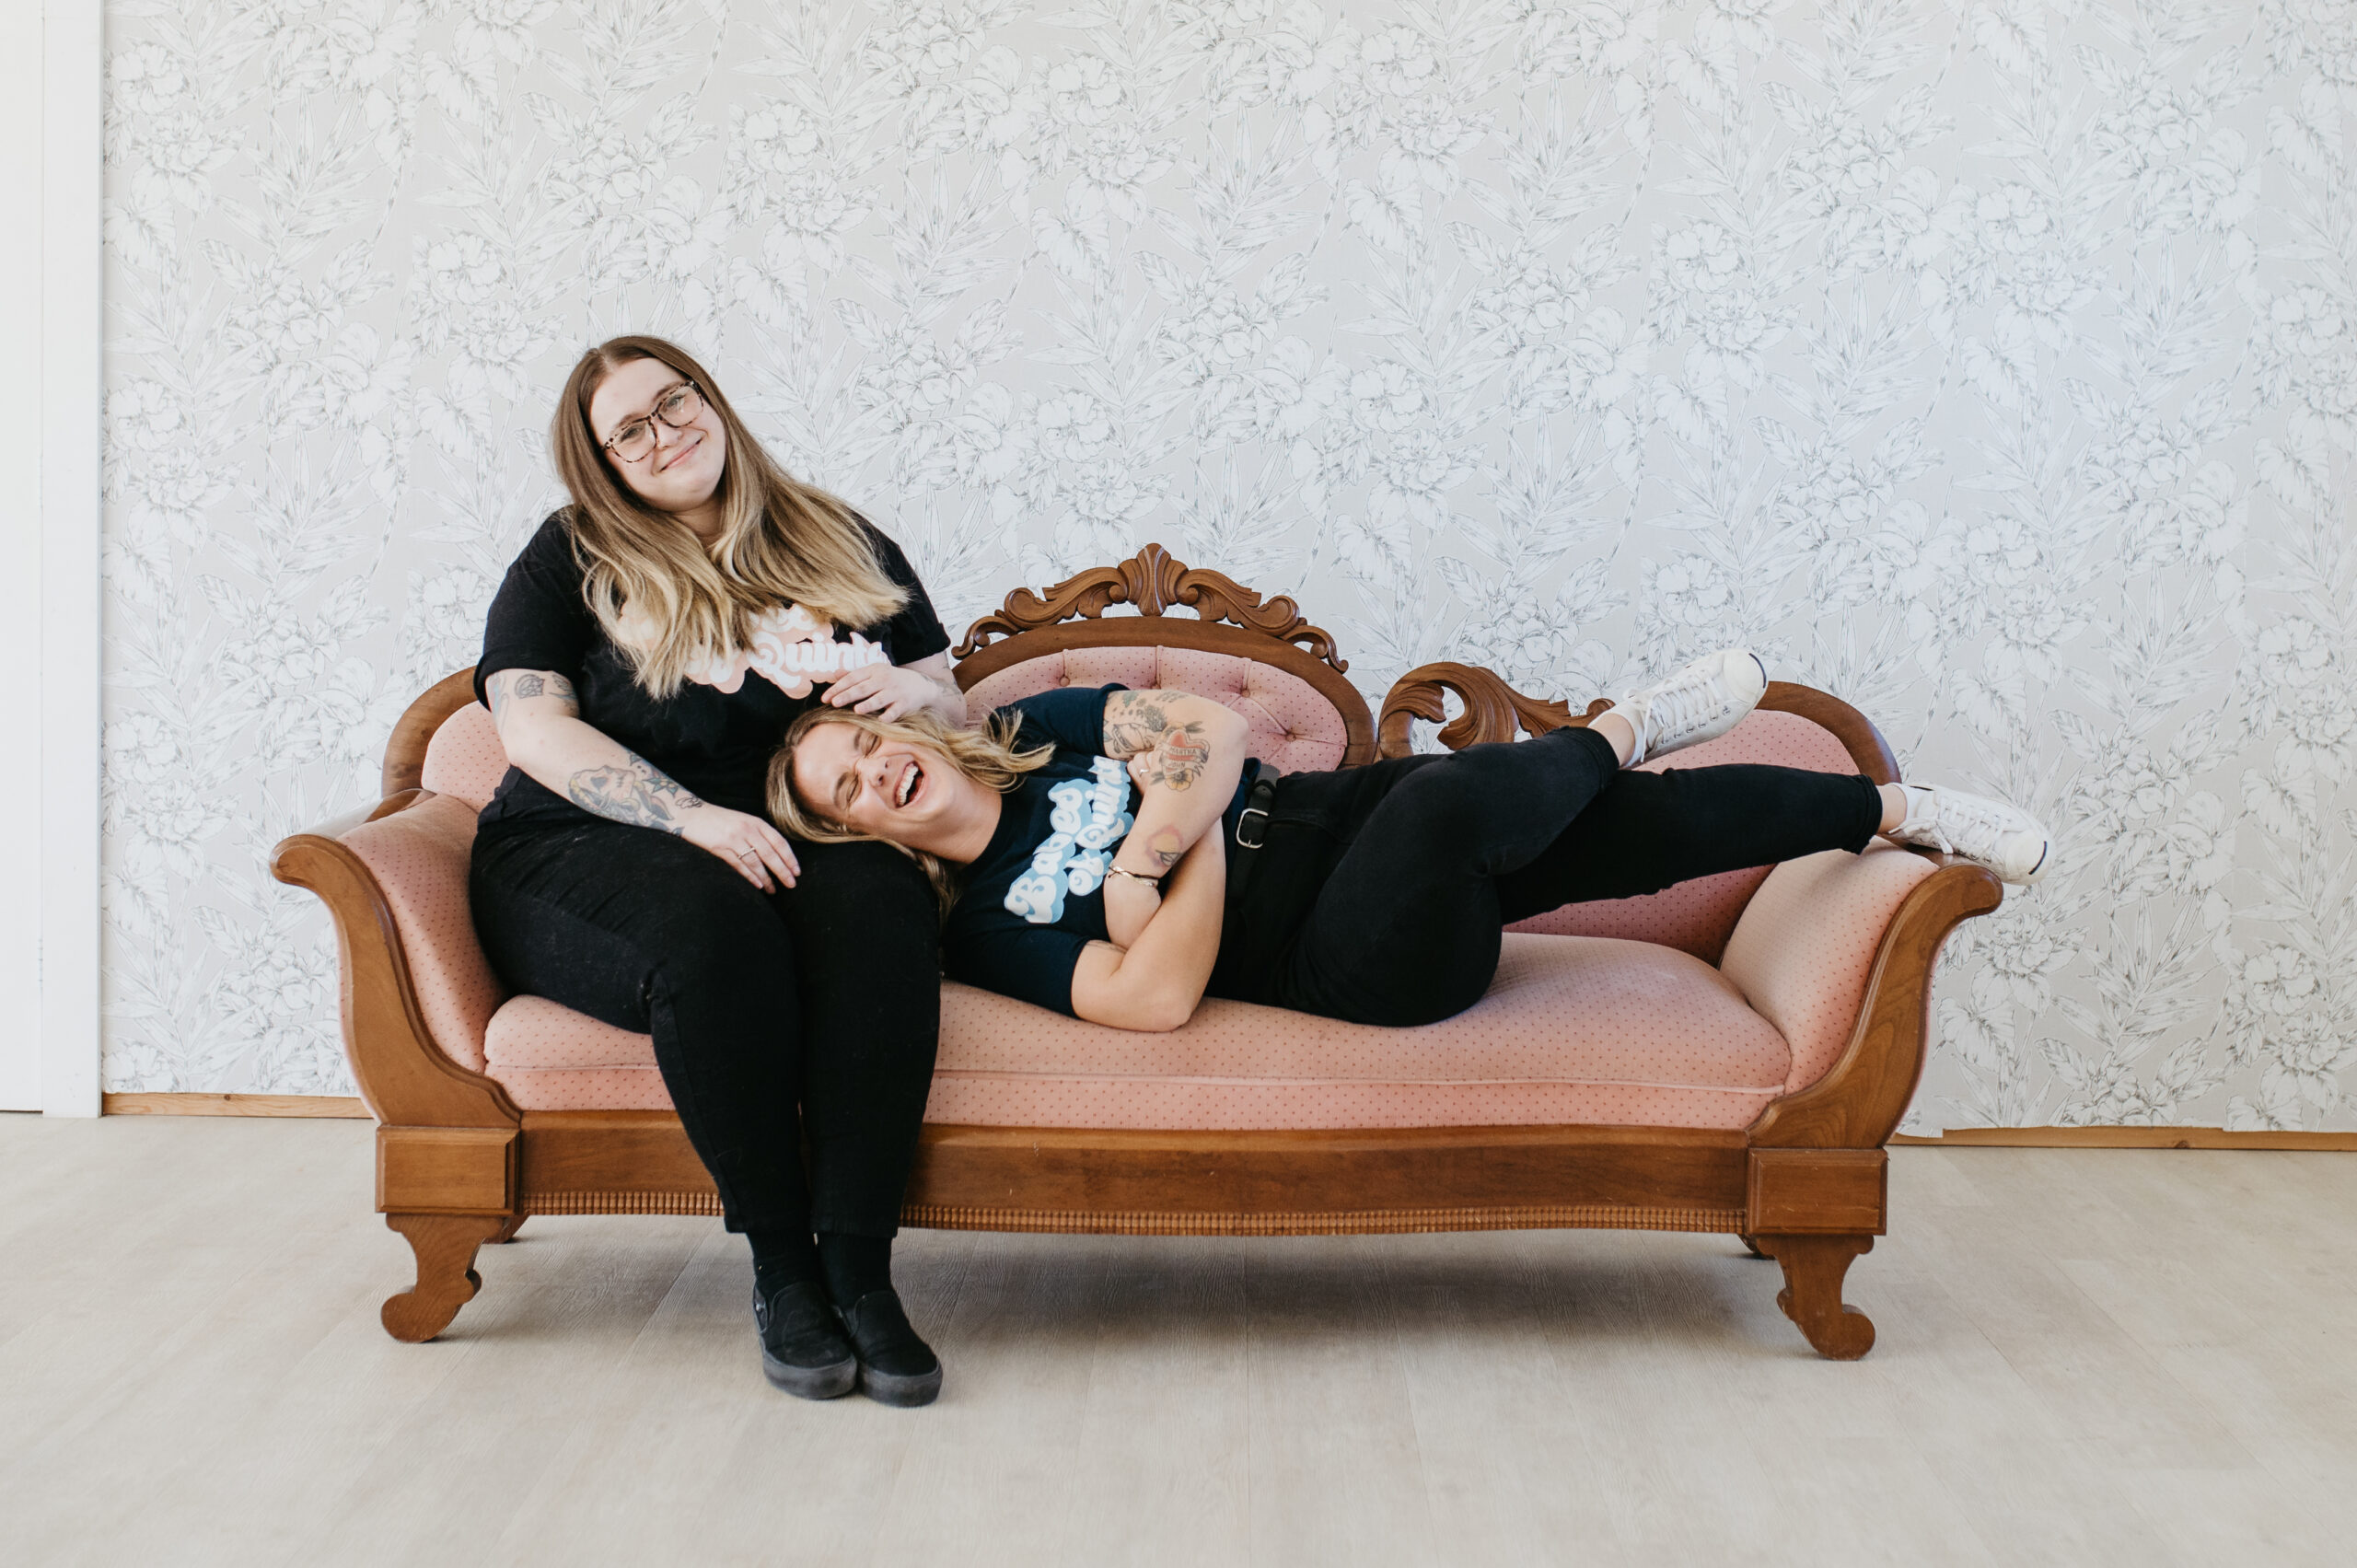 two women (light skin, blonde hair) posing on an antique couch